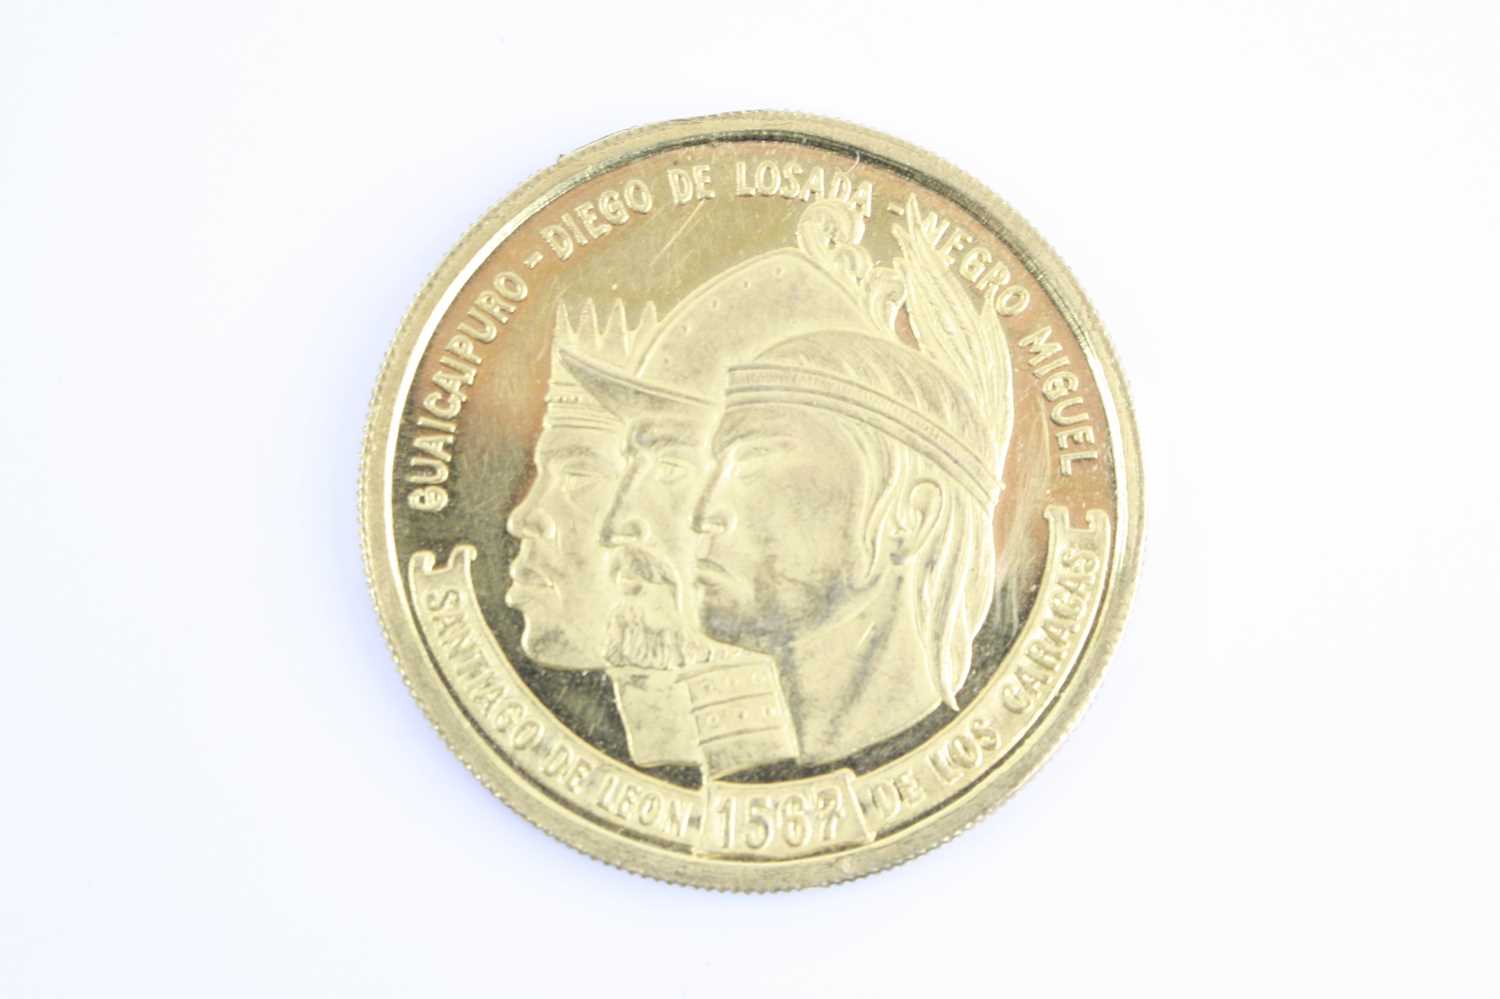 Venezuela, 1567-1967 commemorative gold coin, obv: co-joined busts of Chief Mara, Diego de Losada - Image 2 of 2